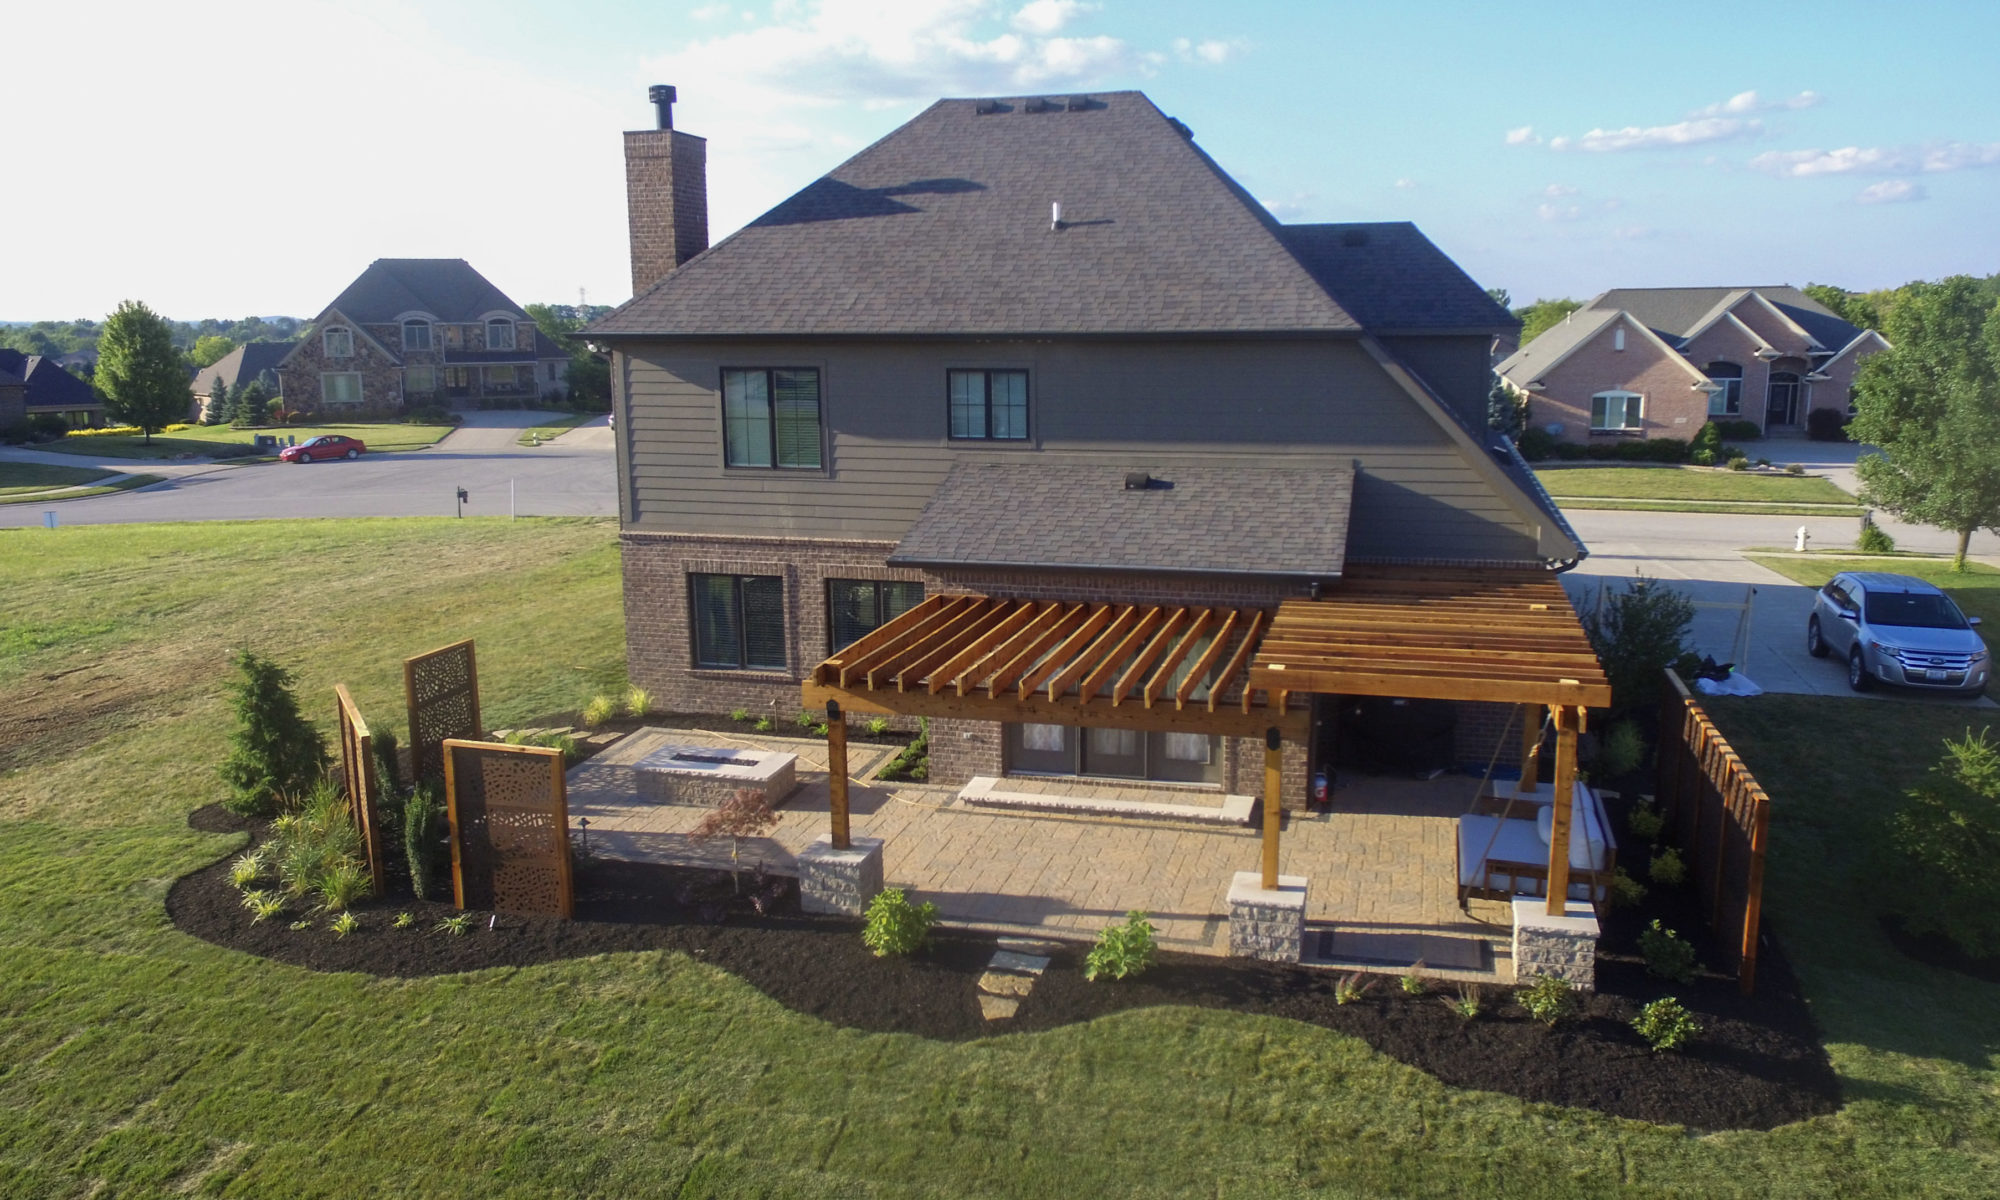 Precision Outdoors Kensington Oasis rough sawn cedar pergola black hardware decorative sunscreens outdoor gas firepit fire pit ample dining seating custom paver patio swinging daybed tech bloc semma wall sandlewood charcoal accent Carmel indiana backyard goals landscaping privacy